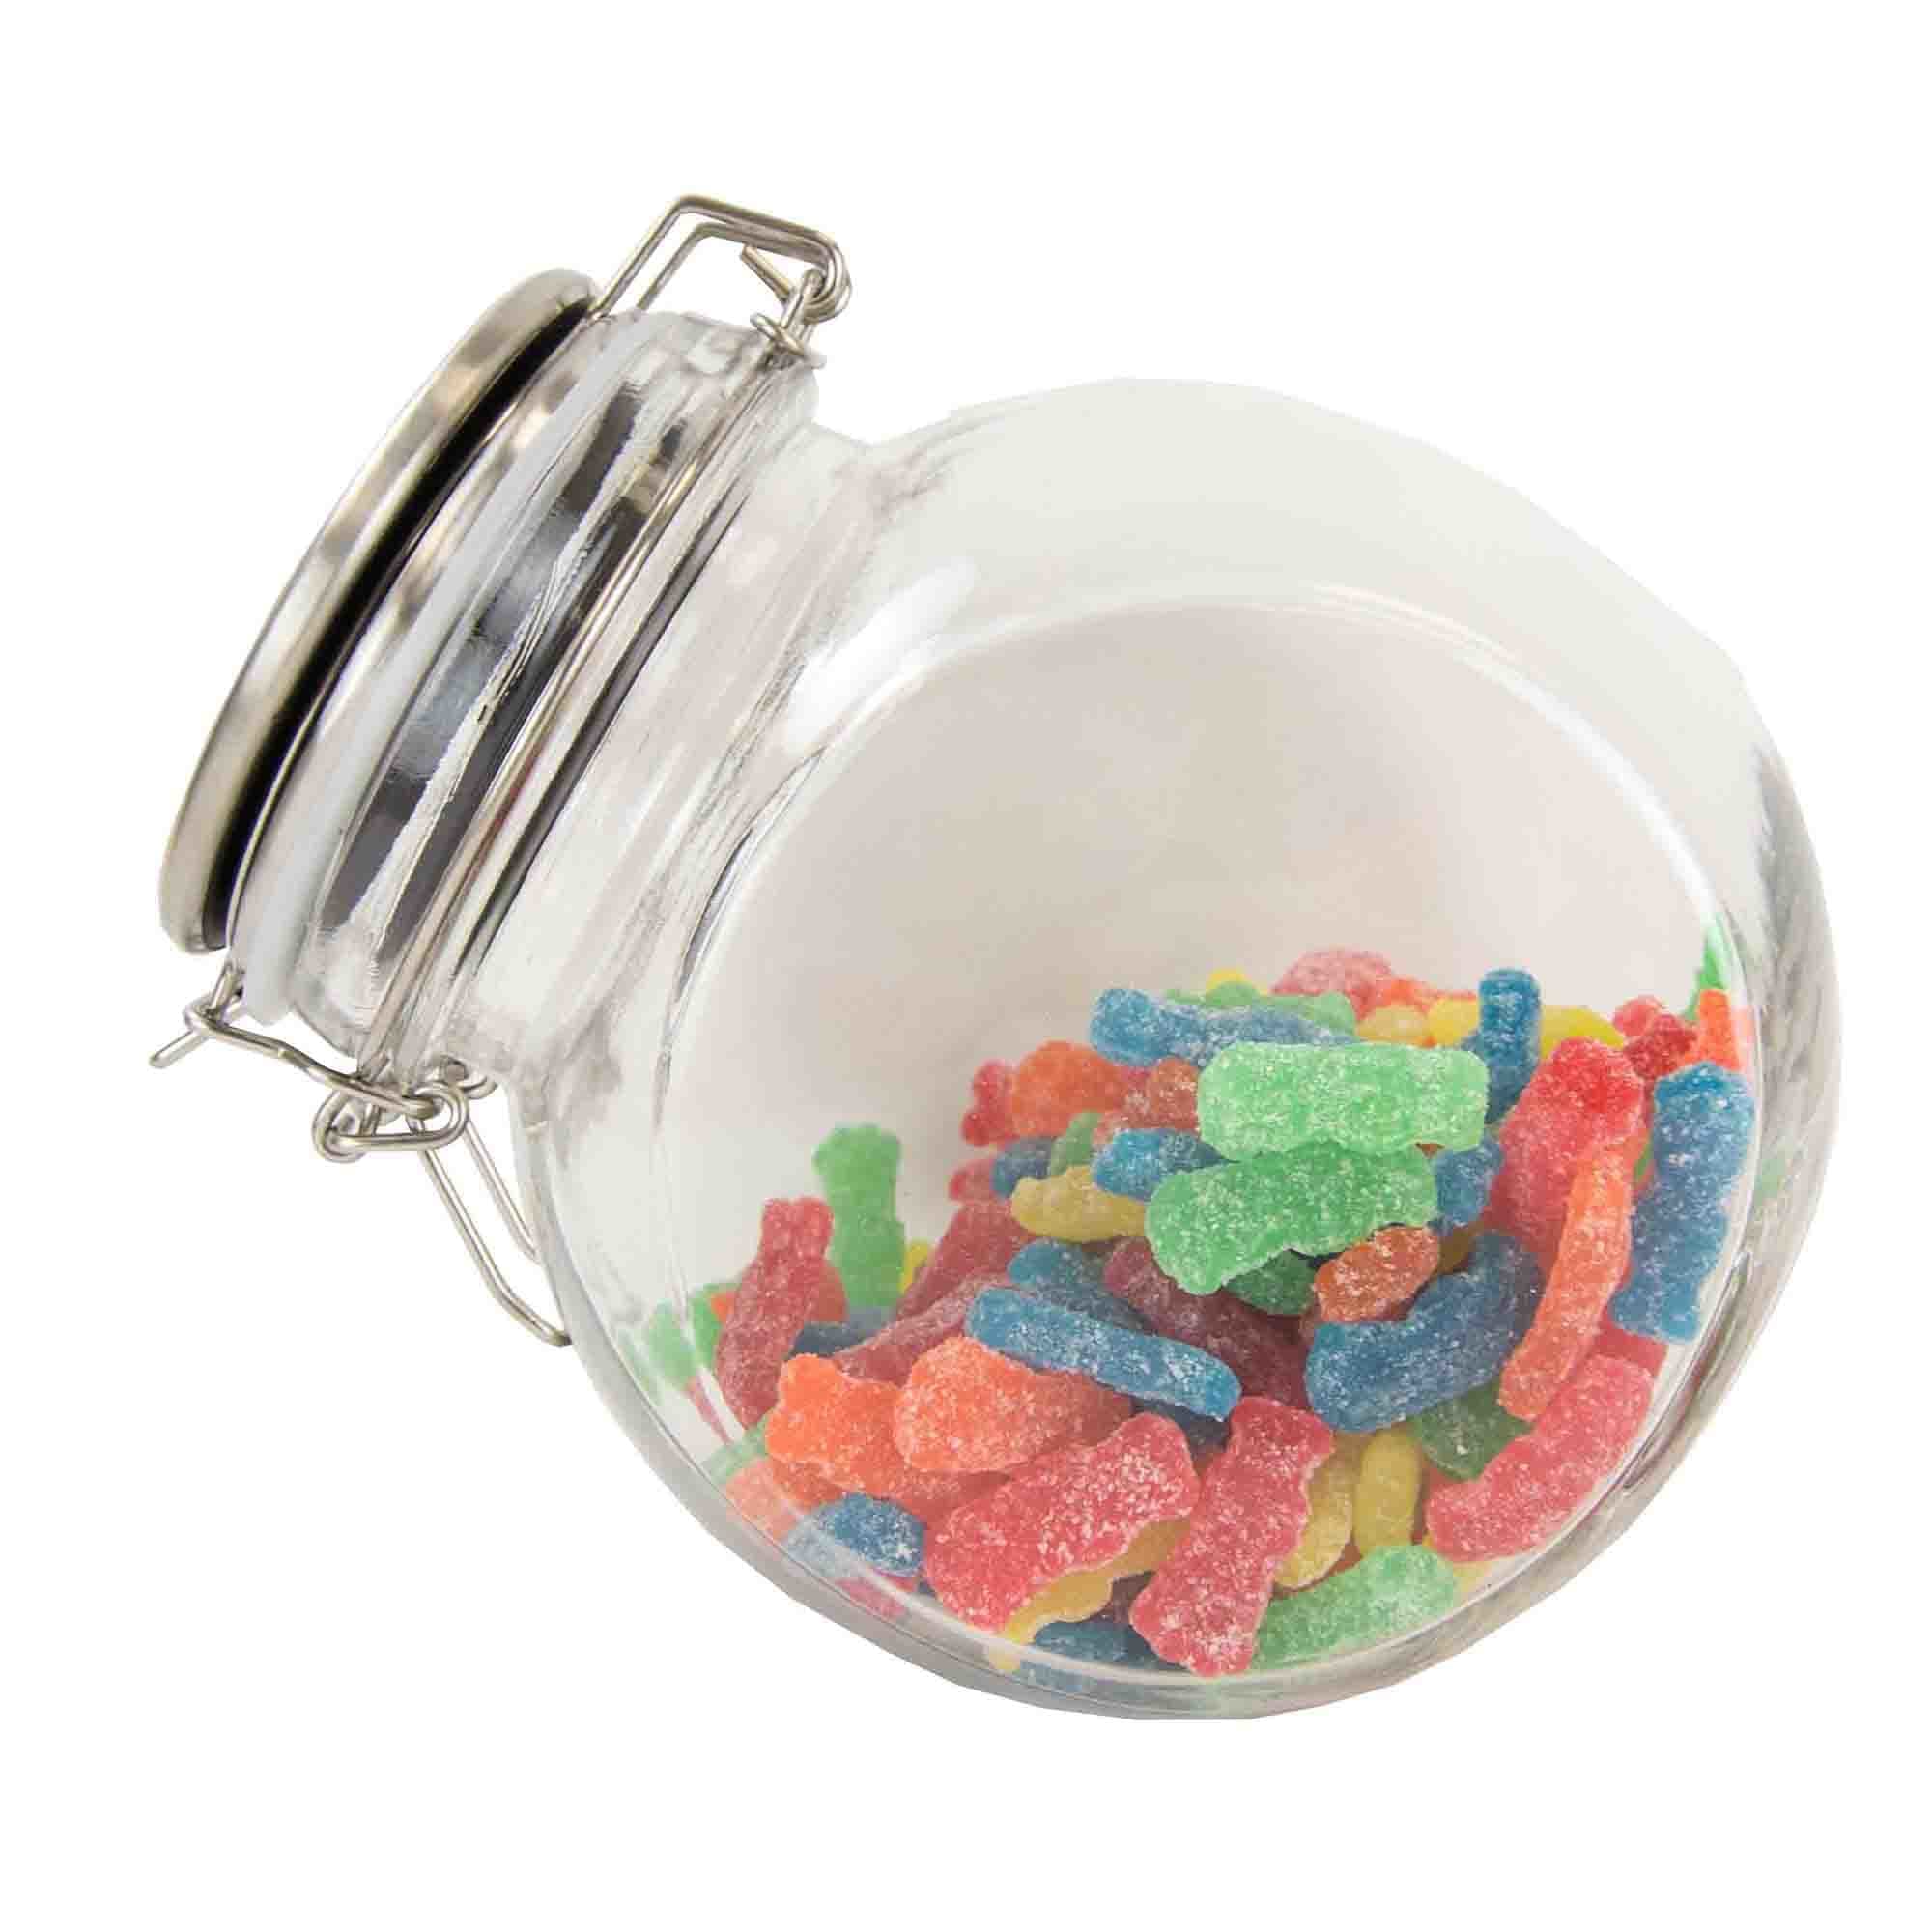 Home Basics 57 oz. Glass Candy Jar $4.00 EACH, CASE PACK OF 12